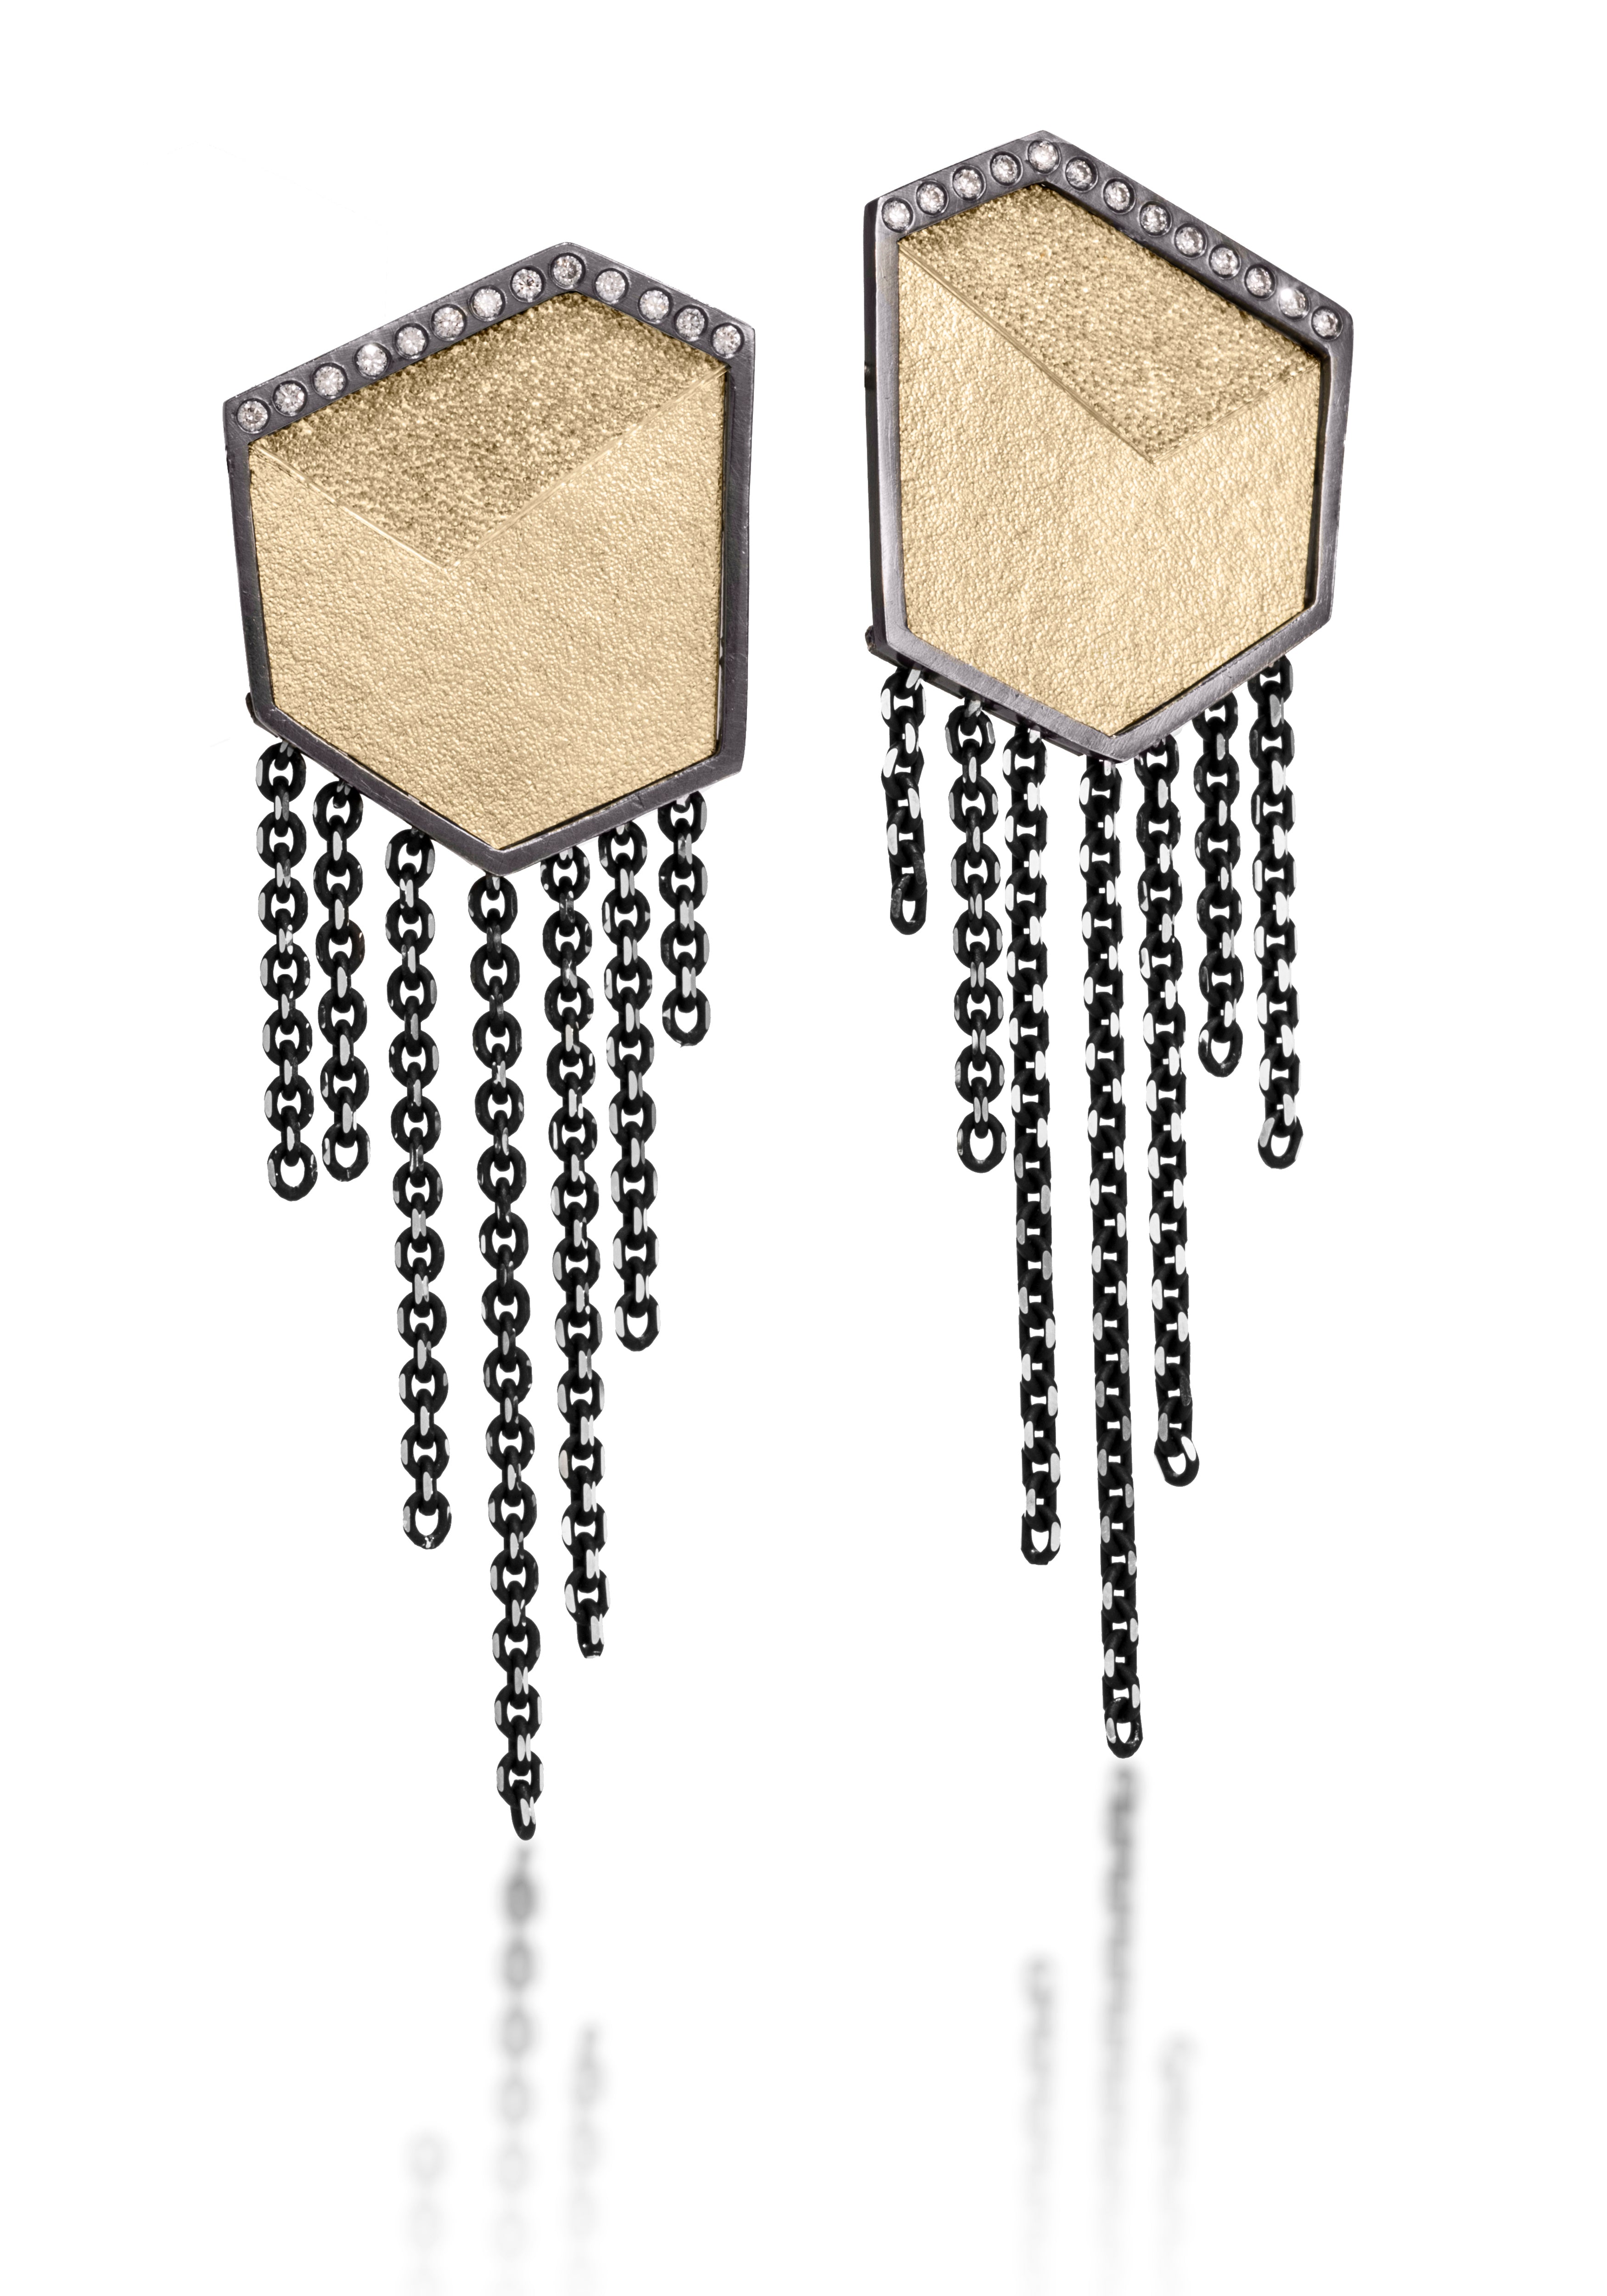 This earring in oxidized sterling silver and richly textured 18k bimetal, is flush set with ideal cut white diamonds. It features 14k gold posts or 18k gold ear wires. Accent facet glitters with the texture of diamond facets, individually scored and textured. Medium size.  Available in post, post fringe, drop and drop fringe styles.  0.1794 tcw